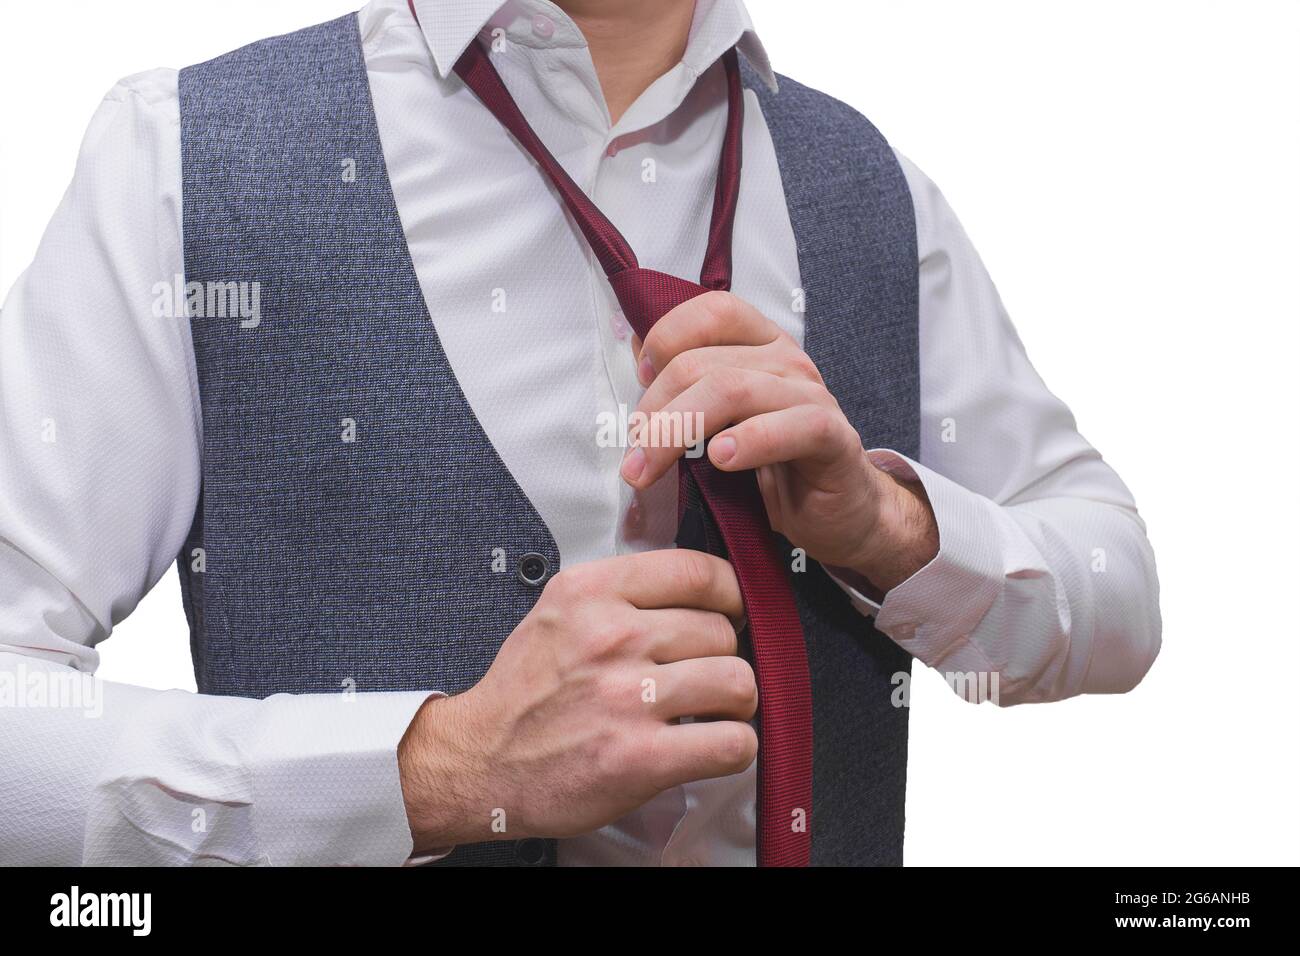 Male Model White Shirt Red Tie Stock Photo 1594949239